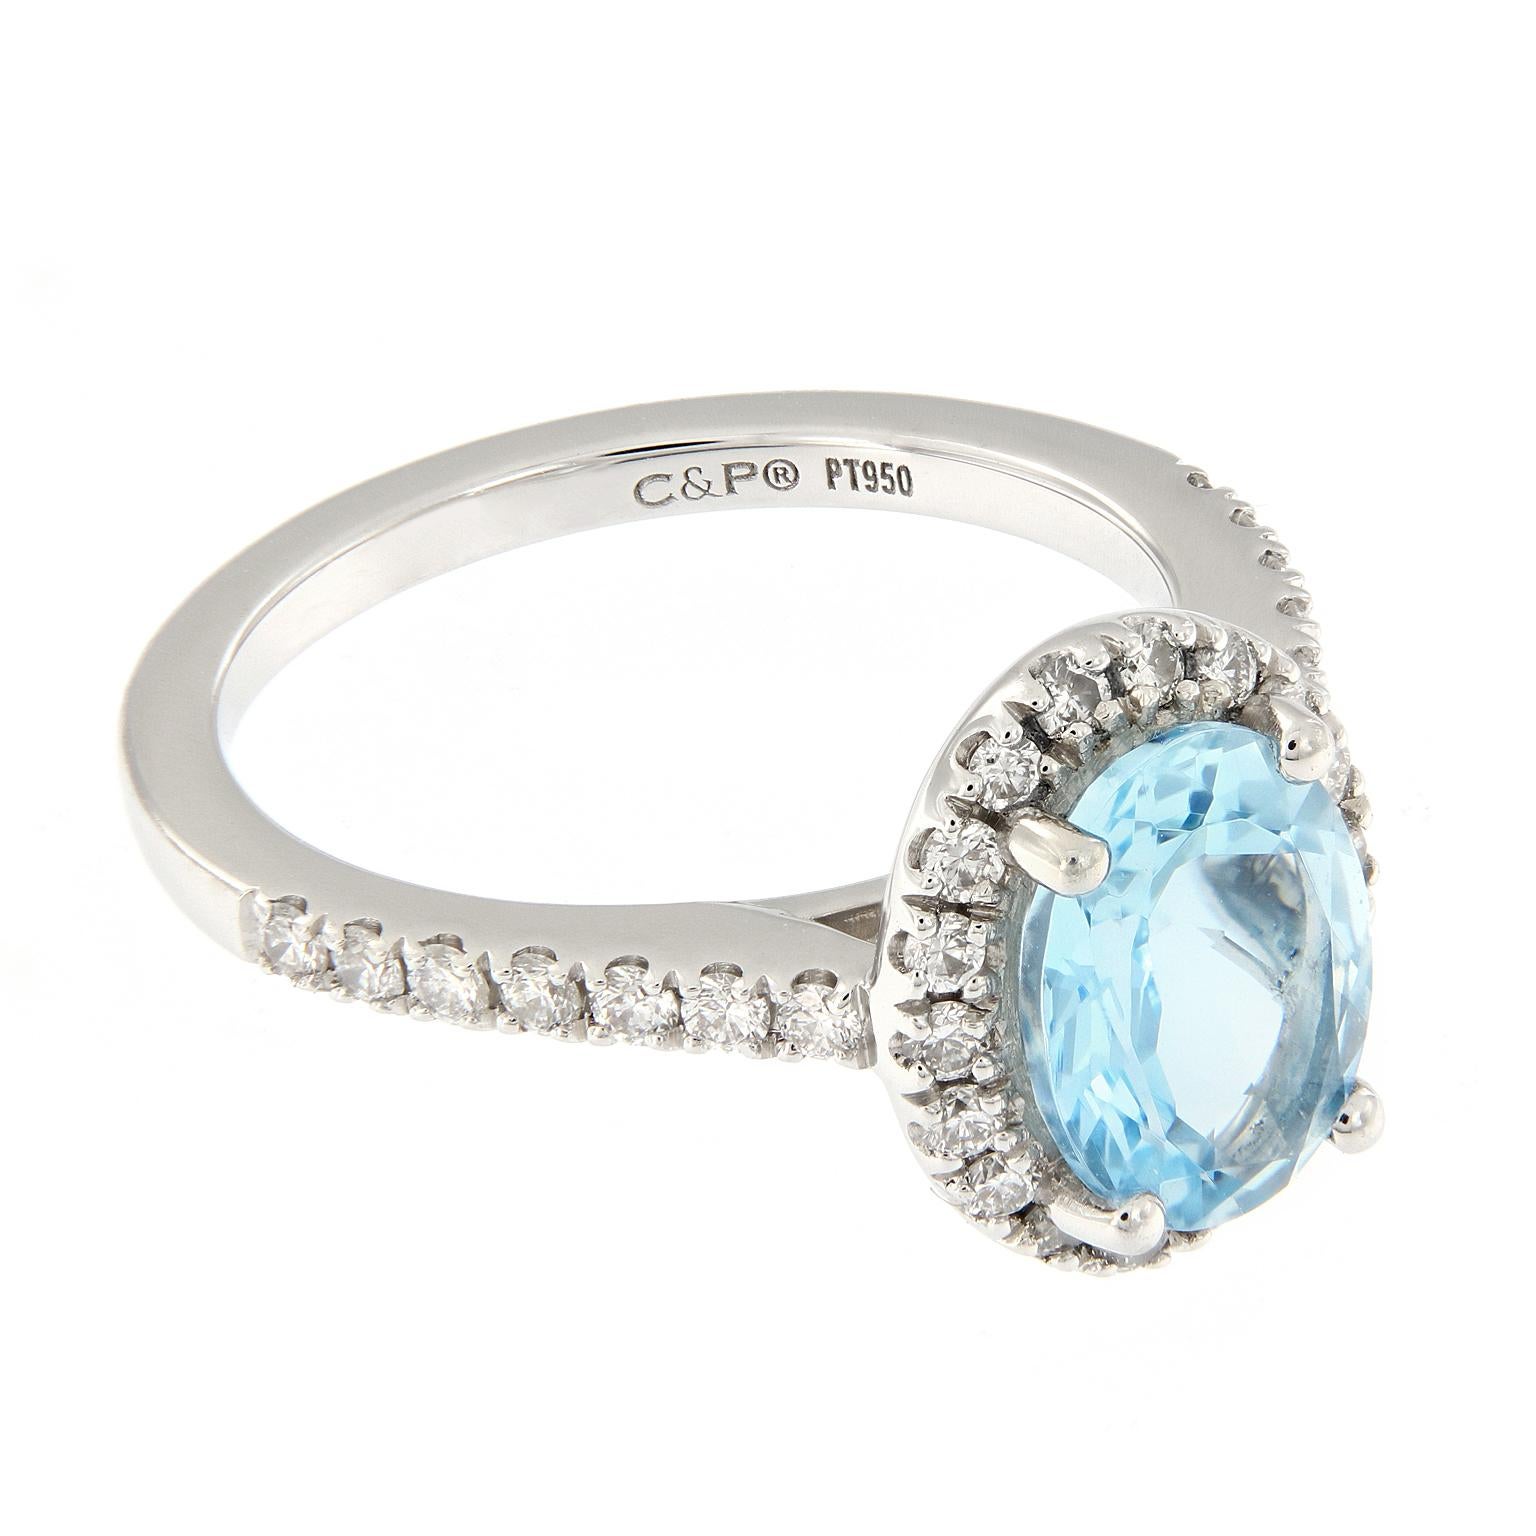 This pretty blue oval aquamarine is surrounded with a halo of diamonds. Enhancing the beauty of the platinum ring are the additional diamond accents on the shank. Top of ring measures 11 mm x 9 mm.
Ring size 4. Weighs 4.7 grams.

Aquamarine 1.27